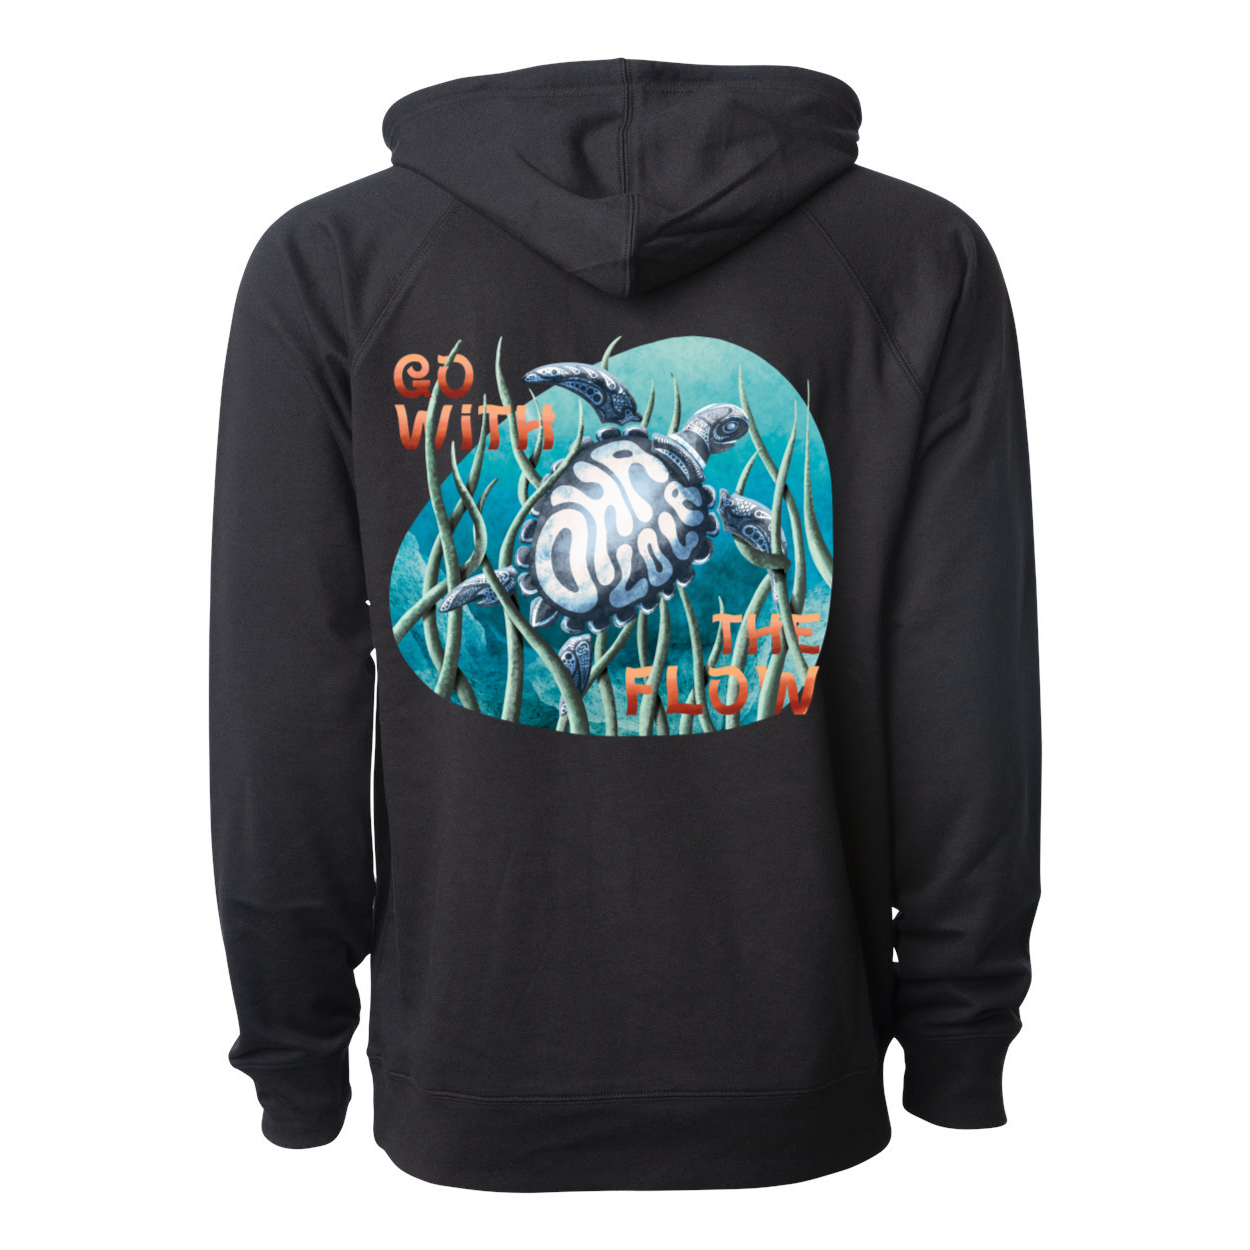 Go with the Flow Lightweight Hoodie